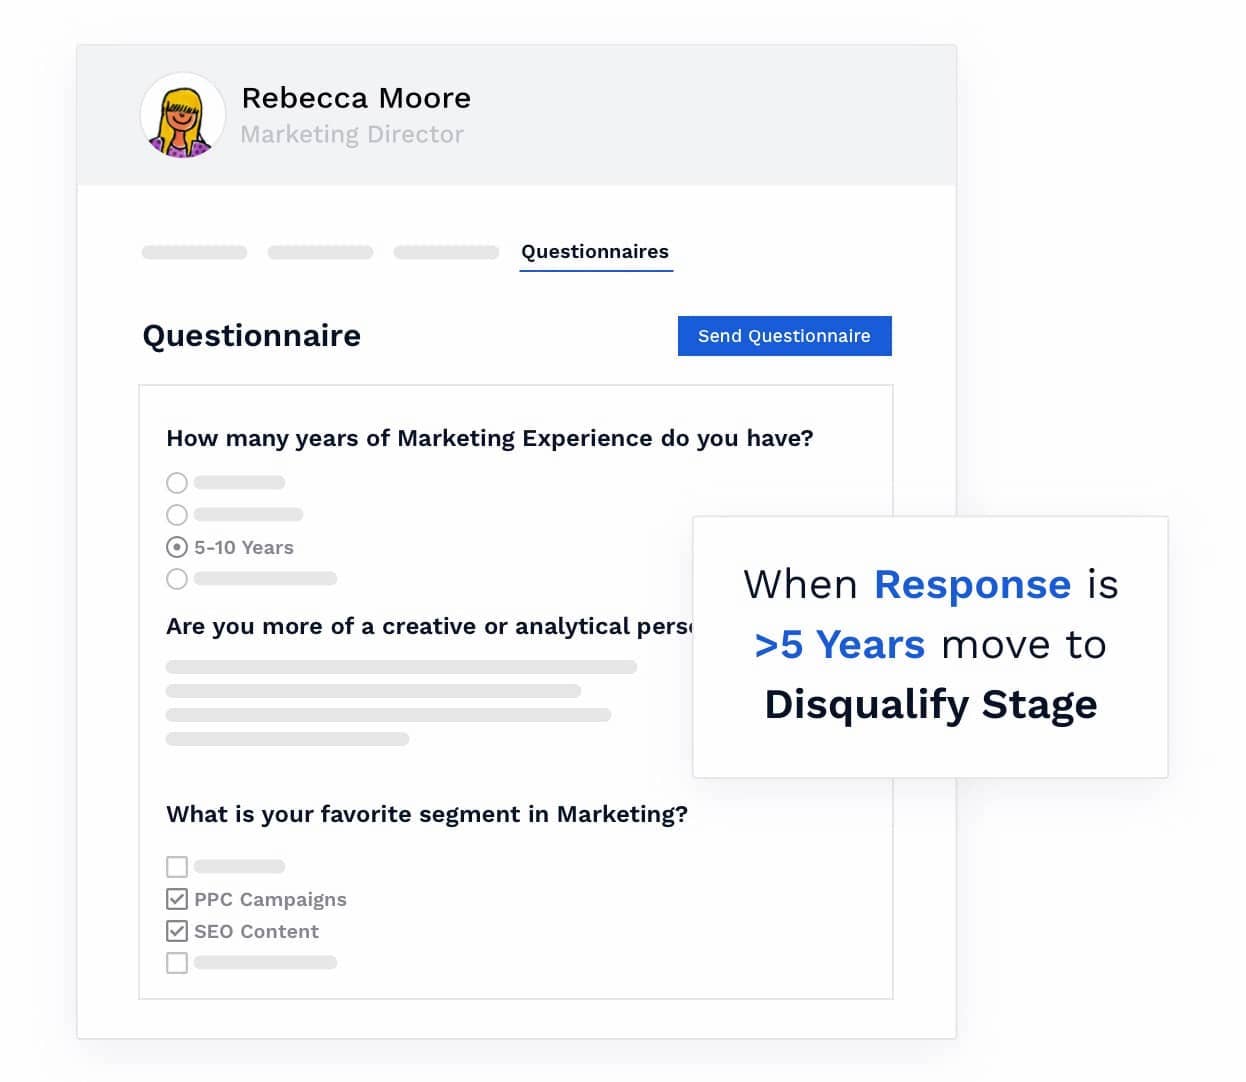 Breezy HR displays an applicant questionnaire and a workflow that automatically disqualifies candidates based on their responses.